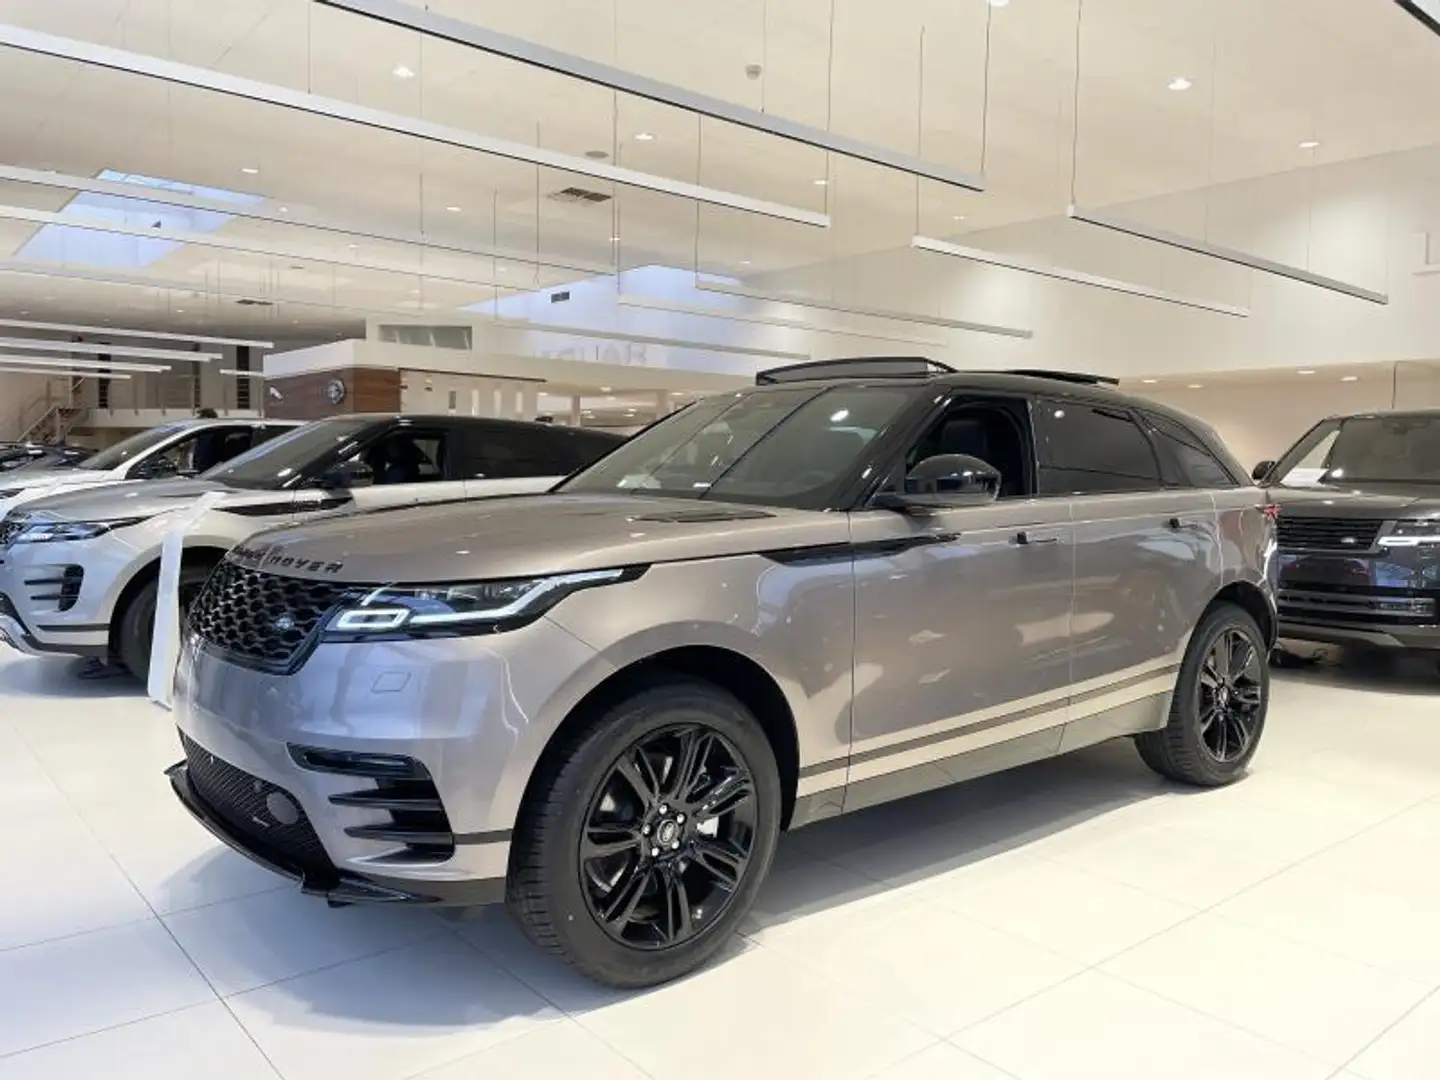 Land Rover Range Rover Velar R-Dynamic Limited Edition D200 - Available Brown - 1